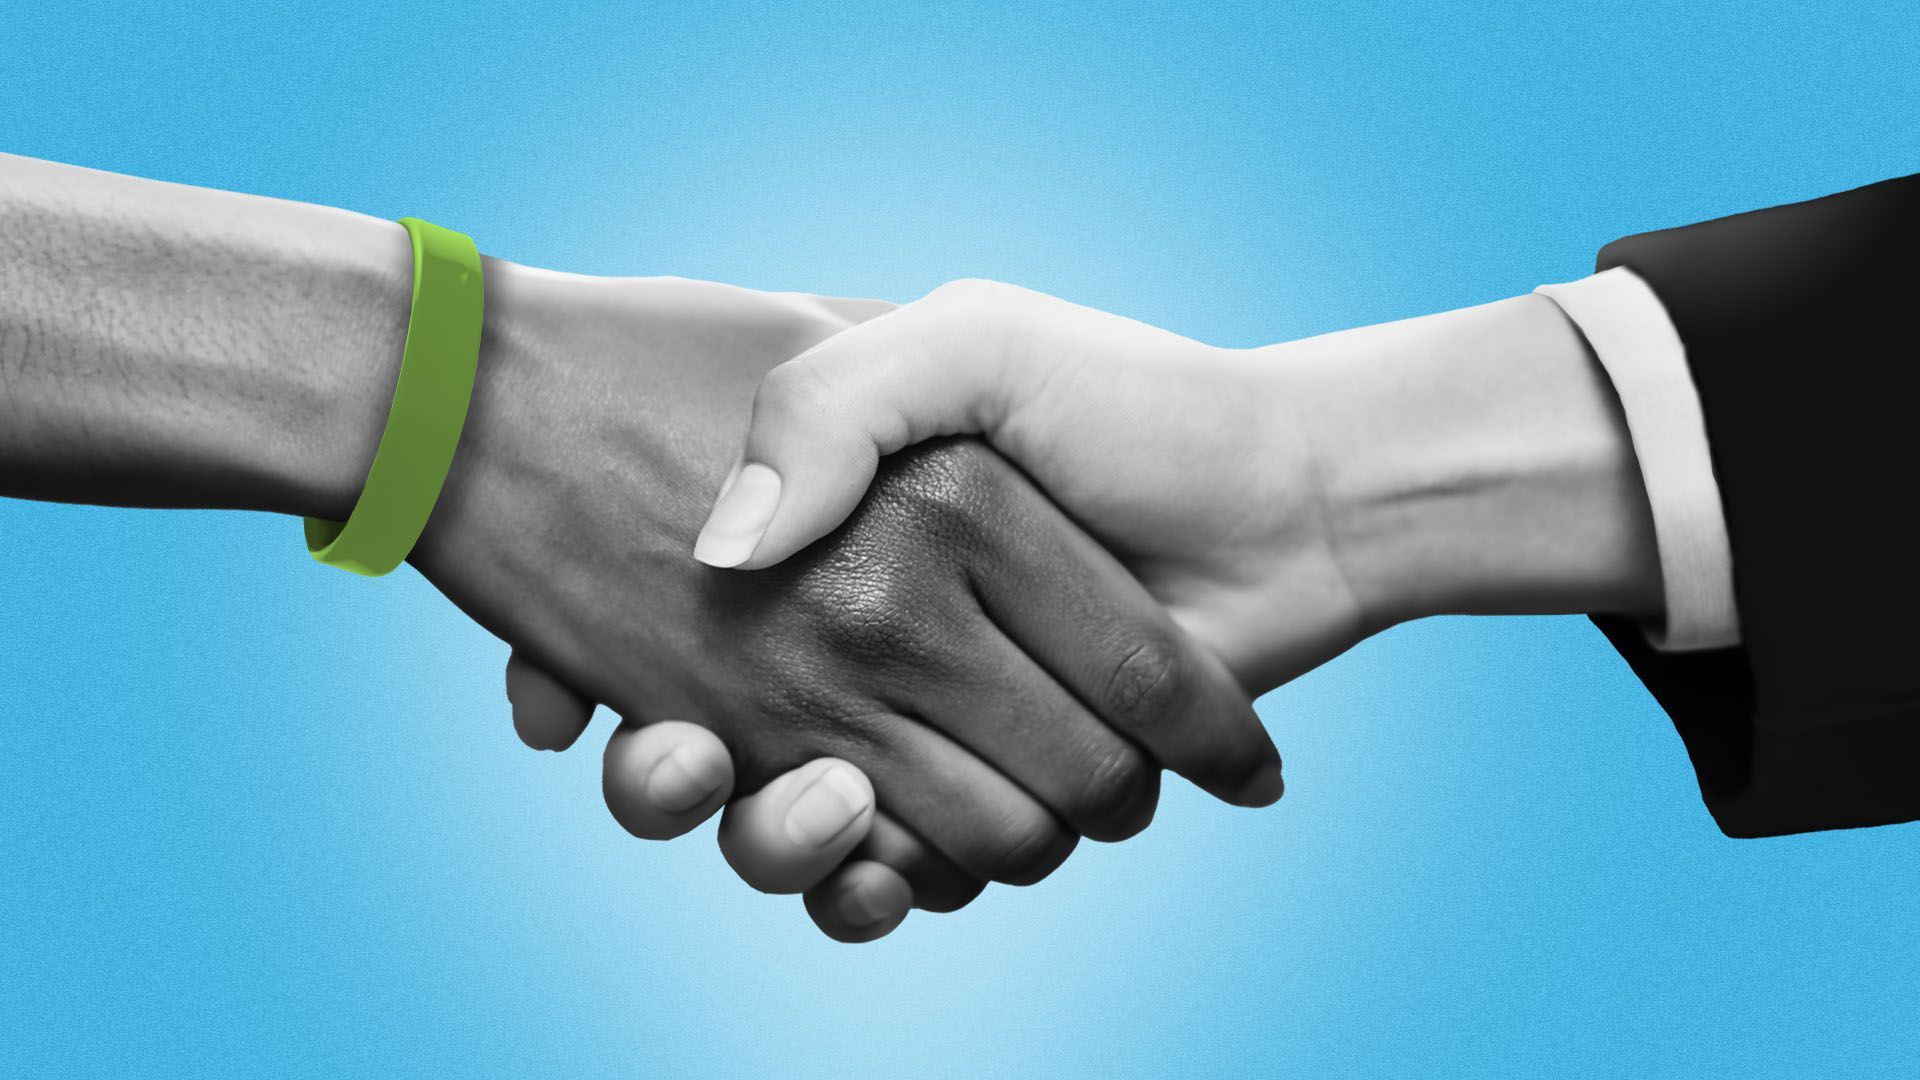 Illustration of a hand in a business suit and a hand wearing a green fundraising bracelet shaking hands